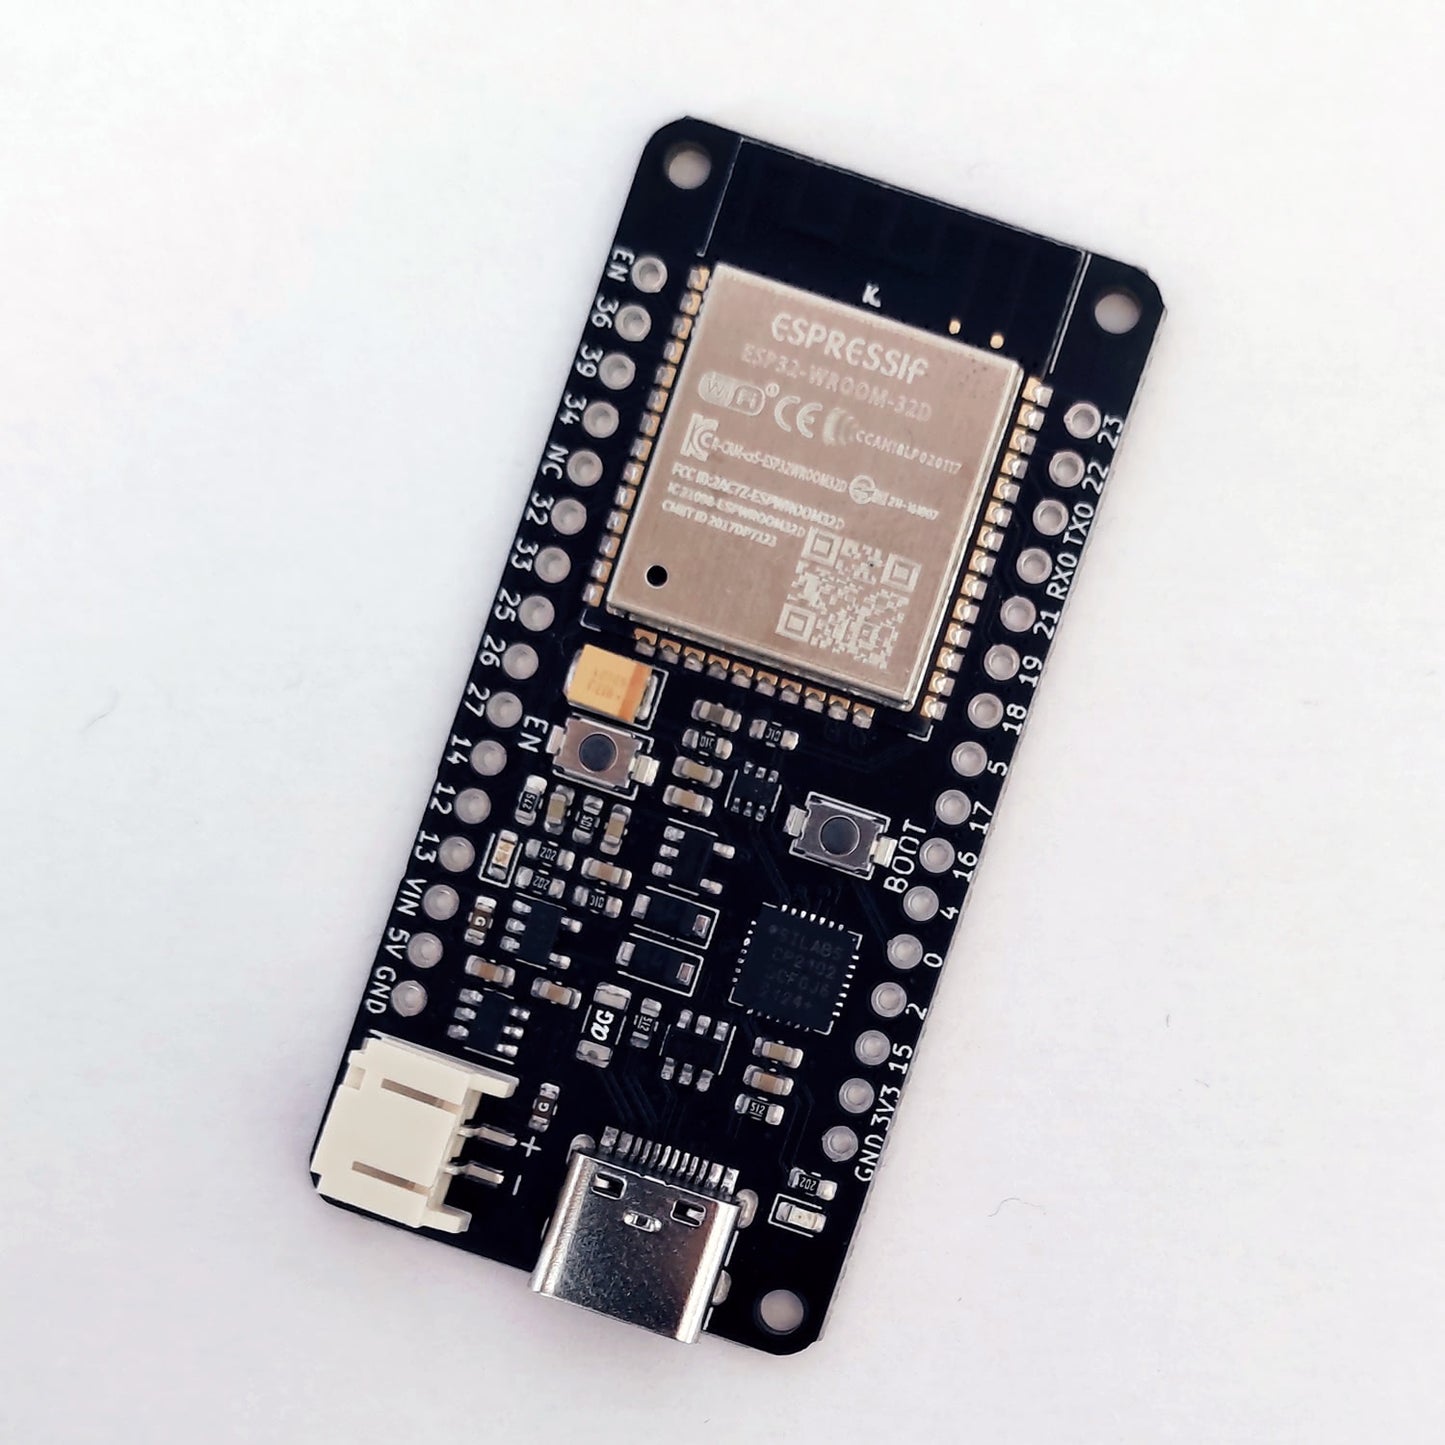 How to connect uPesy ESP32 Wroom DevKit v2 to ThingsBoard?